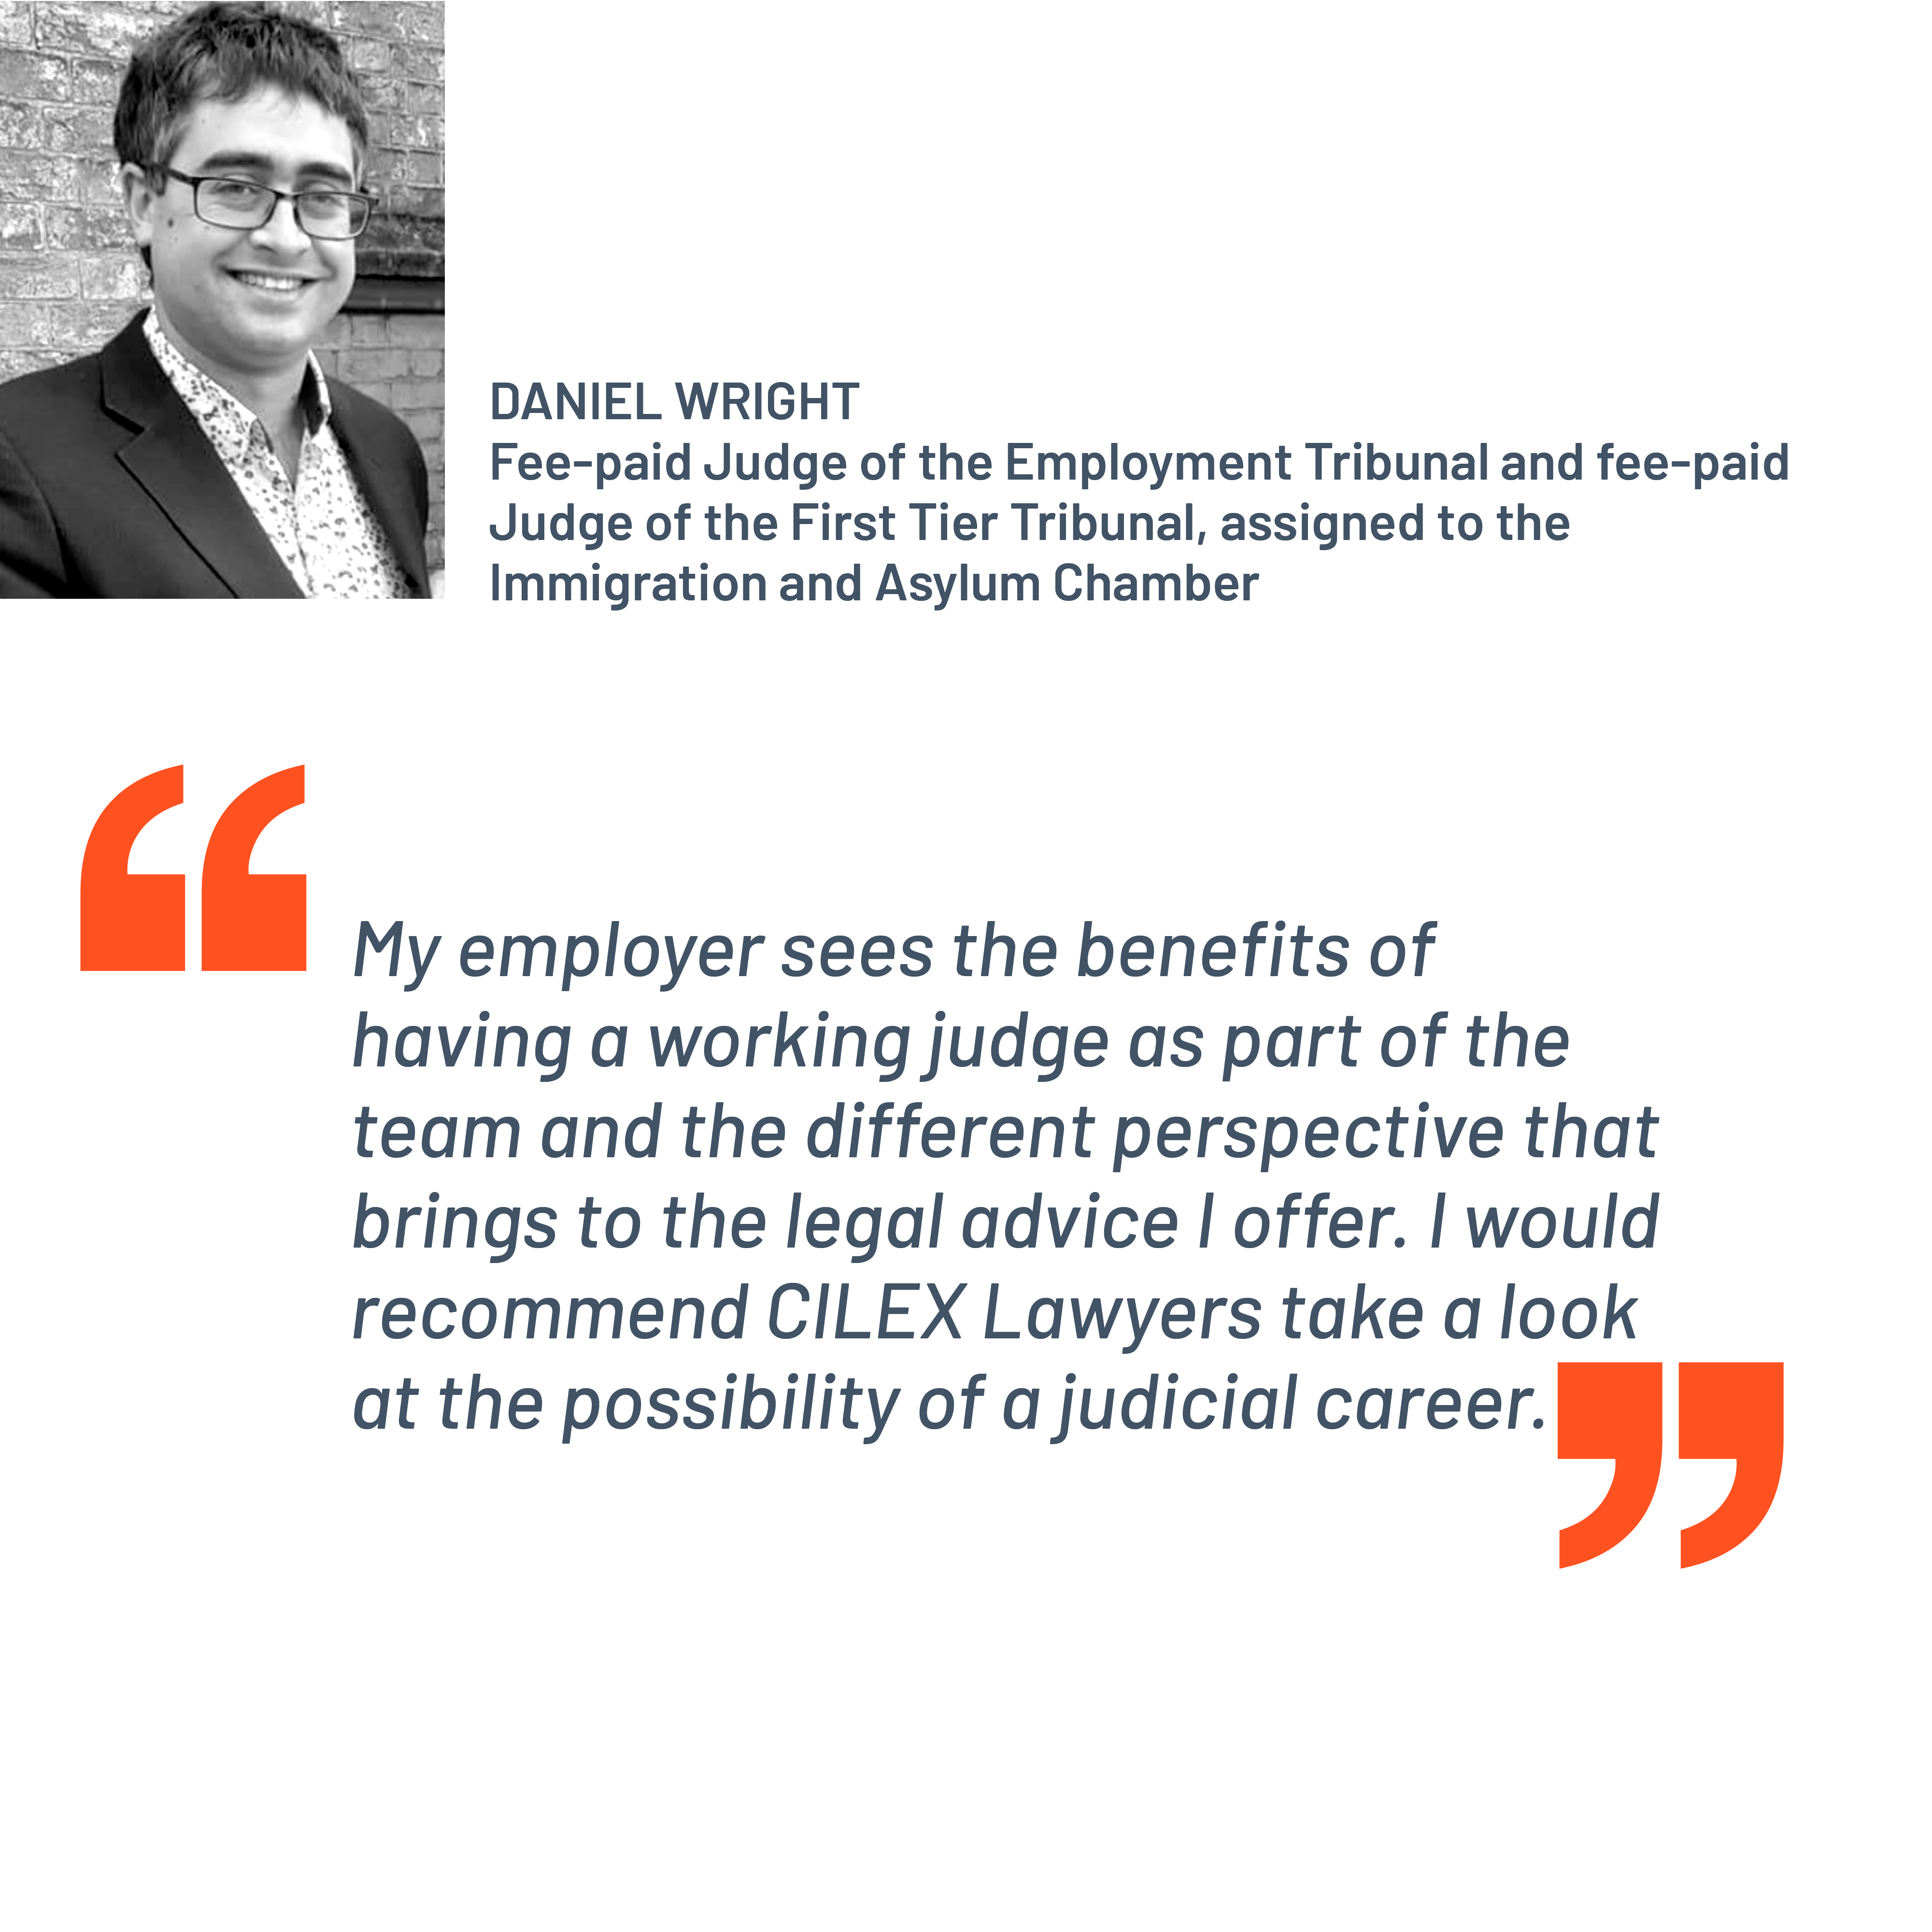 Quote from Daniel Wright, fee-paid Judge of the Employment Tribunal and fee-paid Judge of the First Tier Tribunal, assigned to the Immigration and Asylum Chamber. “My employer sees the benefits of having a working judge as part of the team and the different perspective that brings to the legal advice I offer. I would recommend CILEX Lawyers take a look at the possibility of a judicial career.”